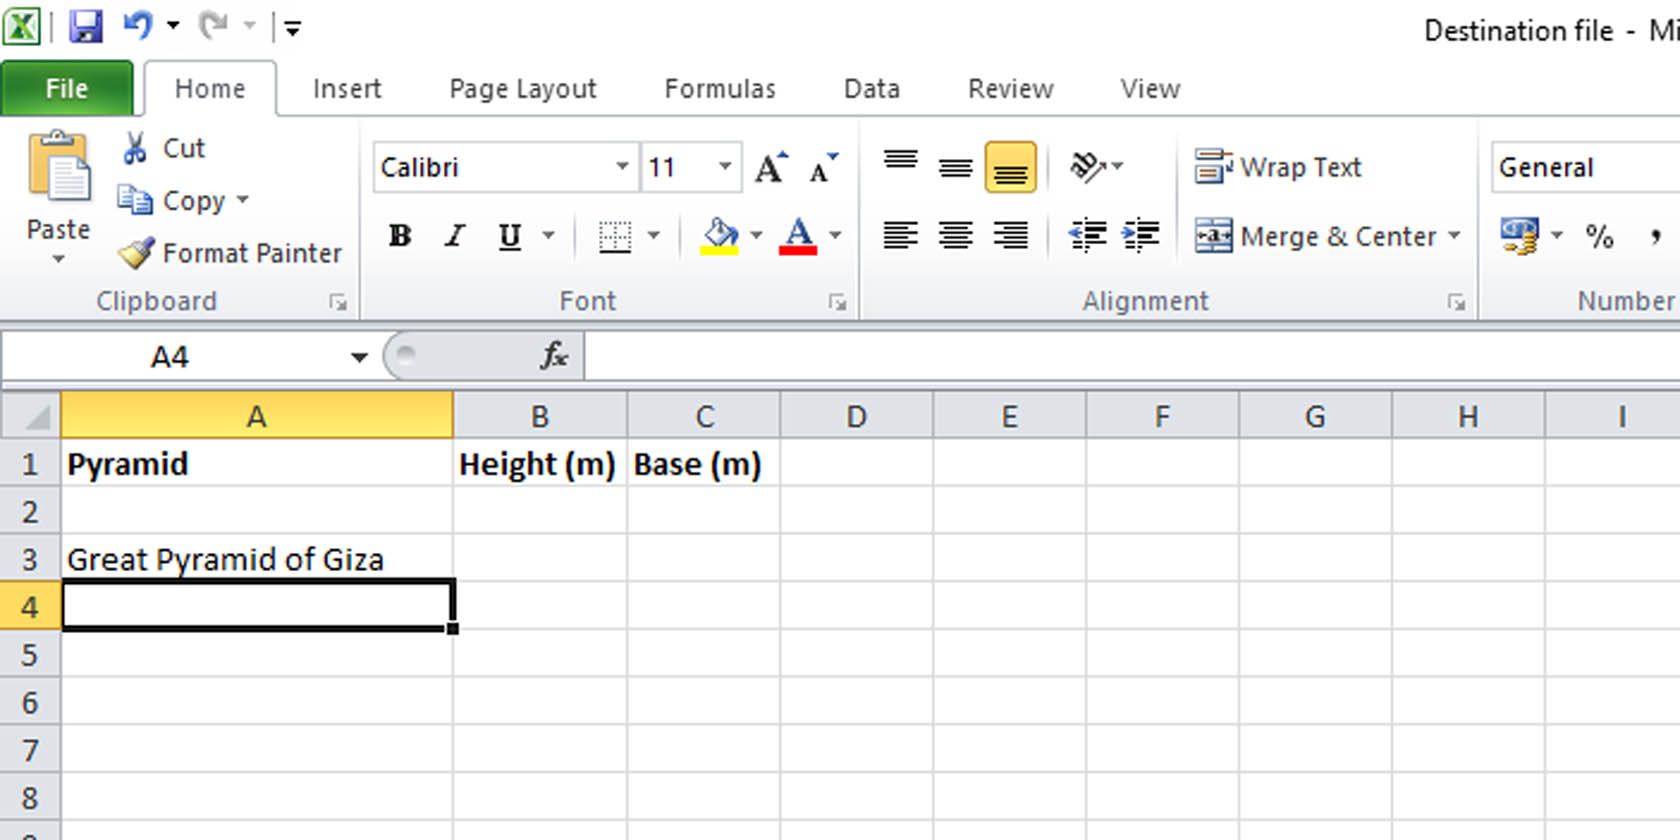 Excel data imported from source